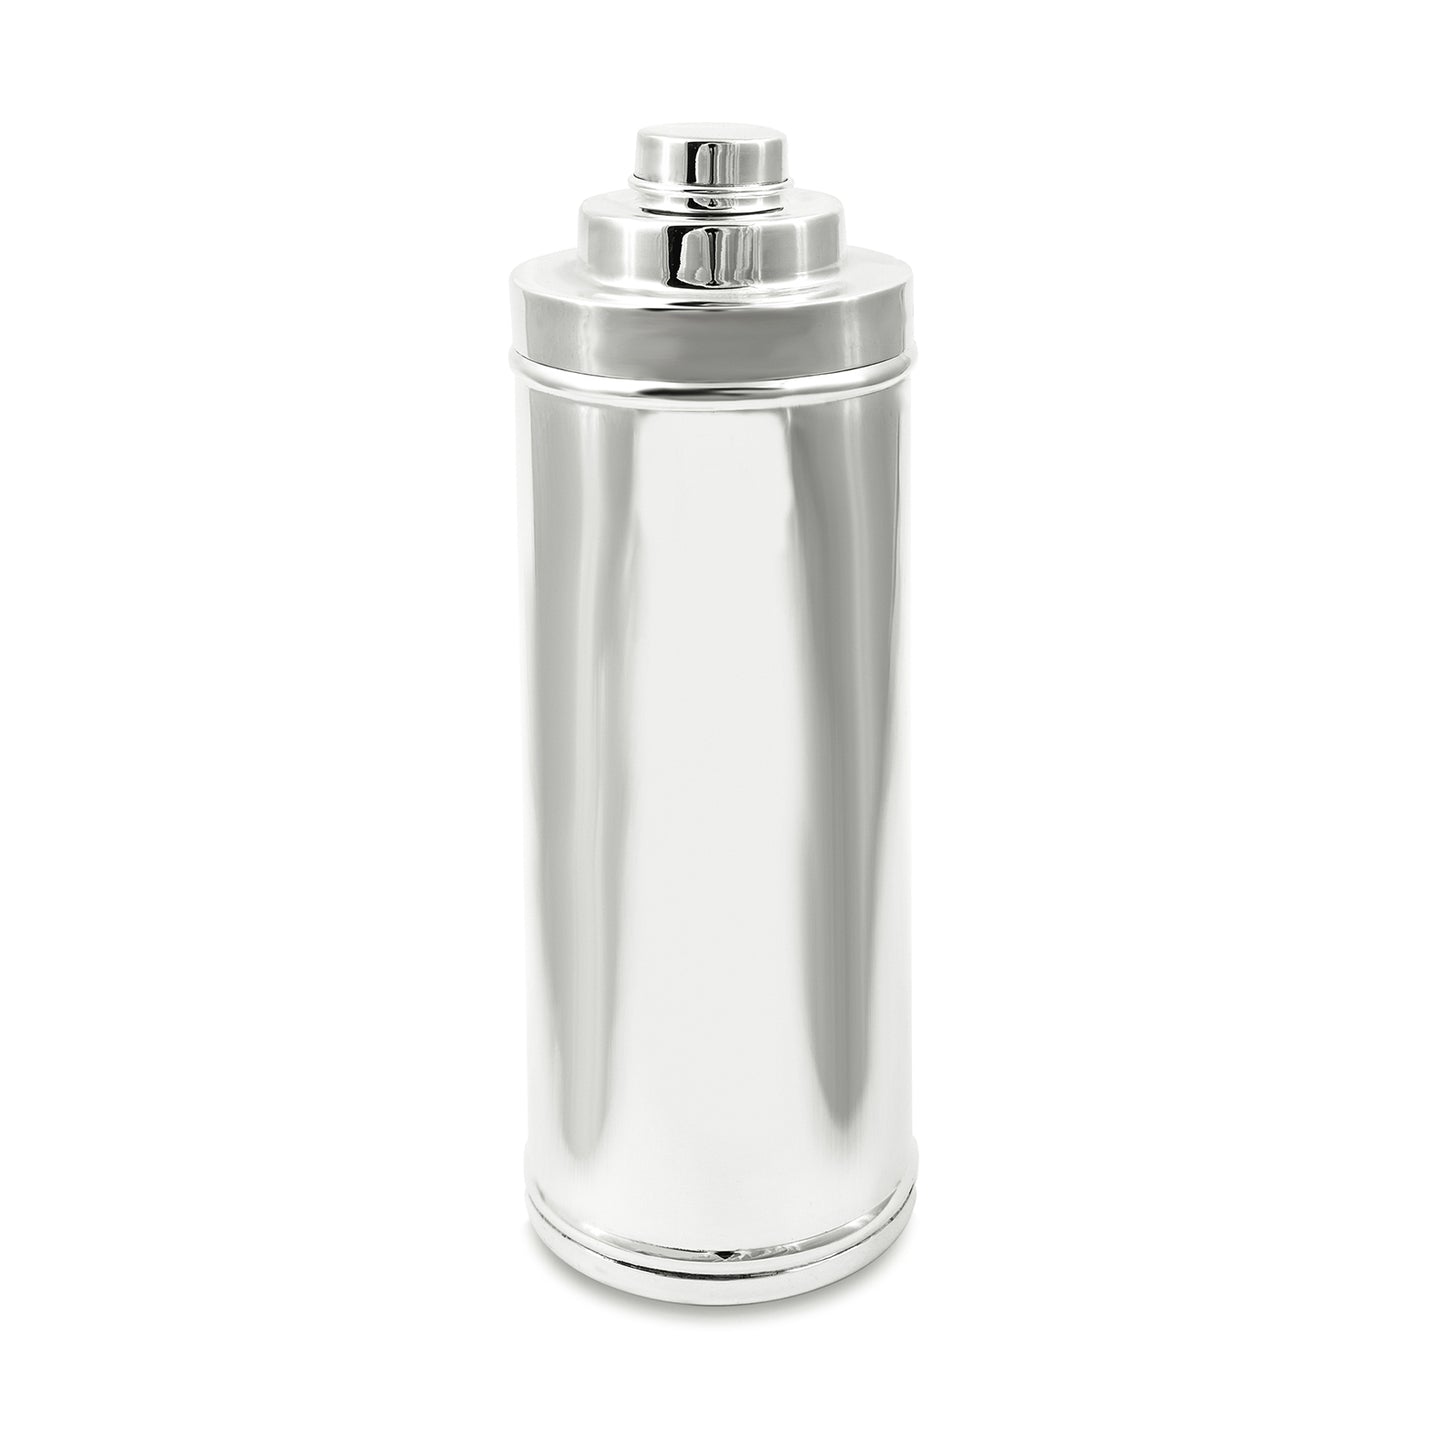 SHAKER - SILVER PLATED